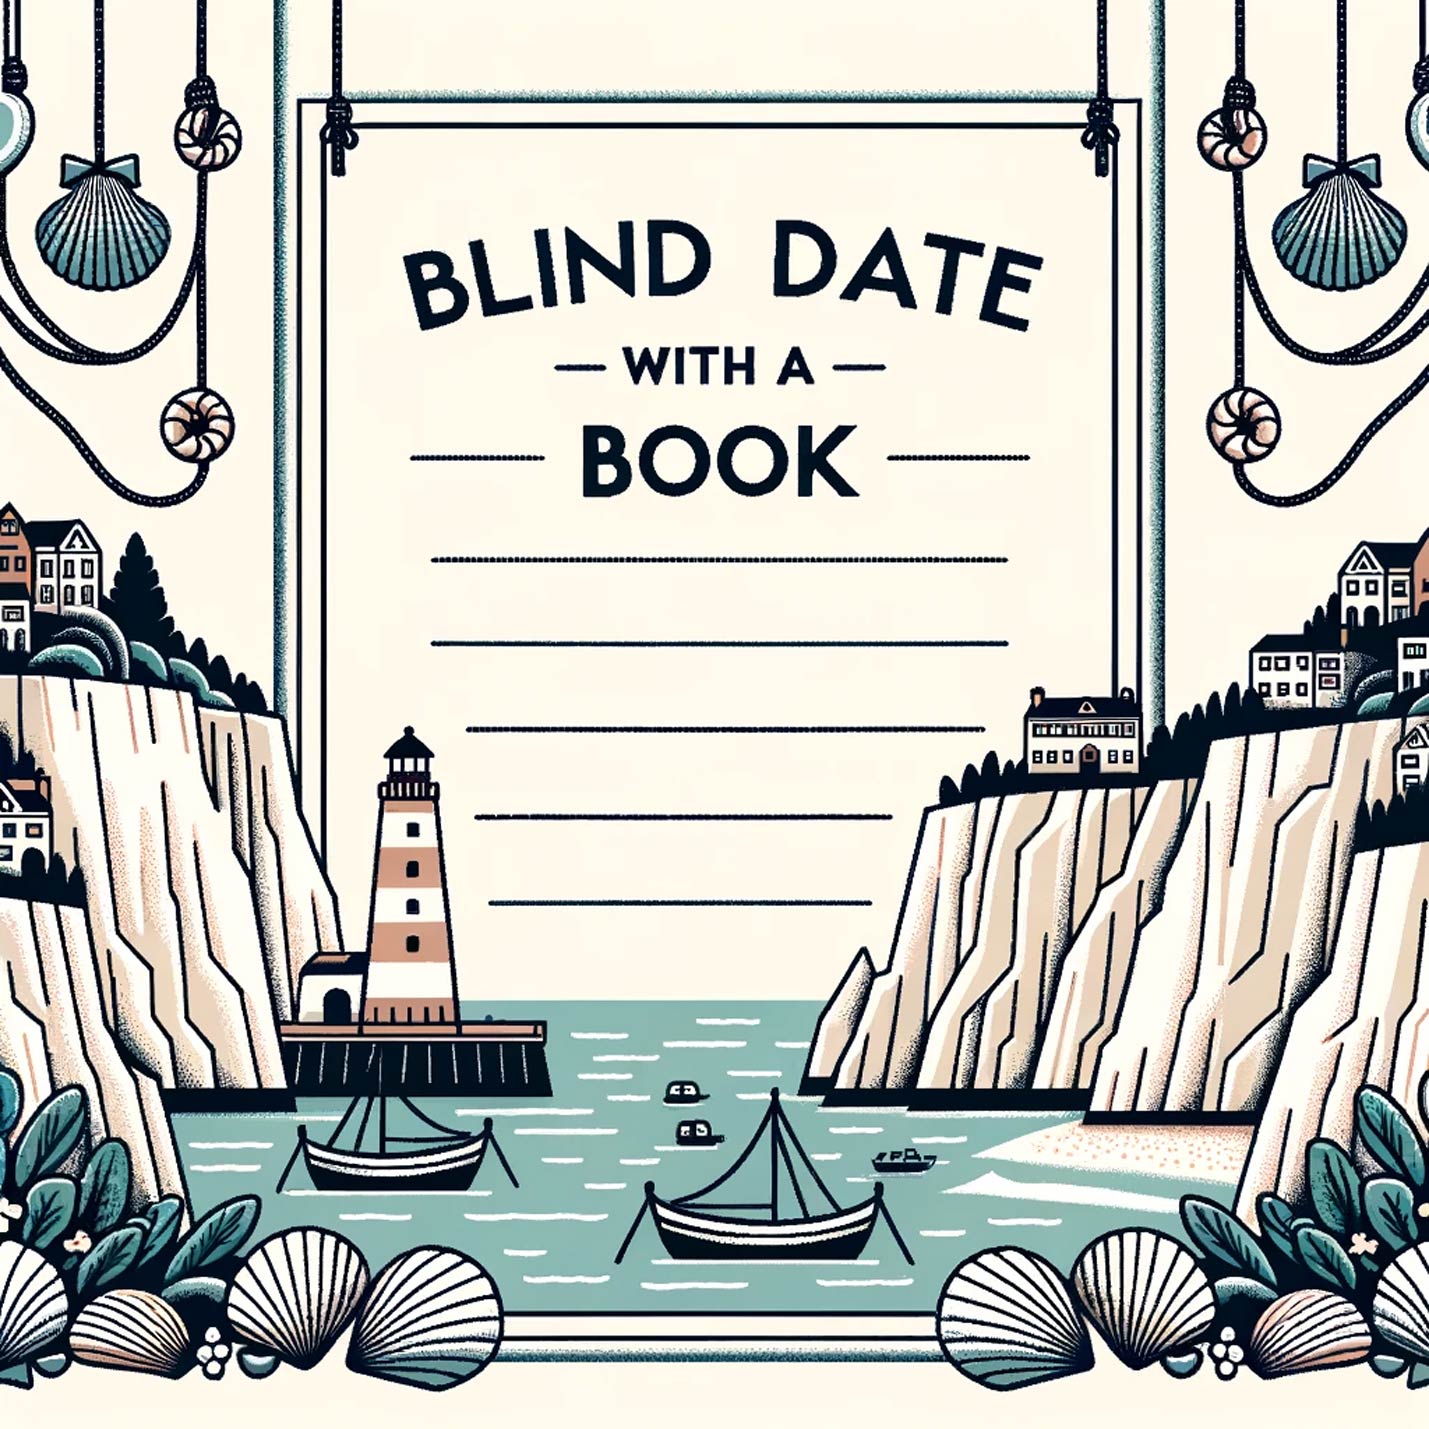 Blind Date With A Book Free Template - Portugal